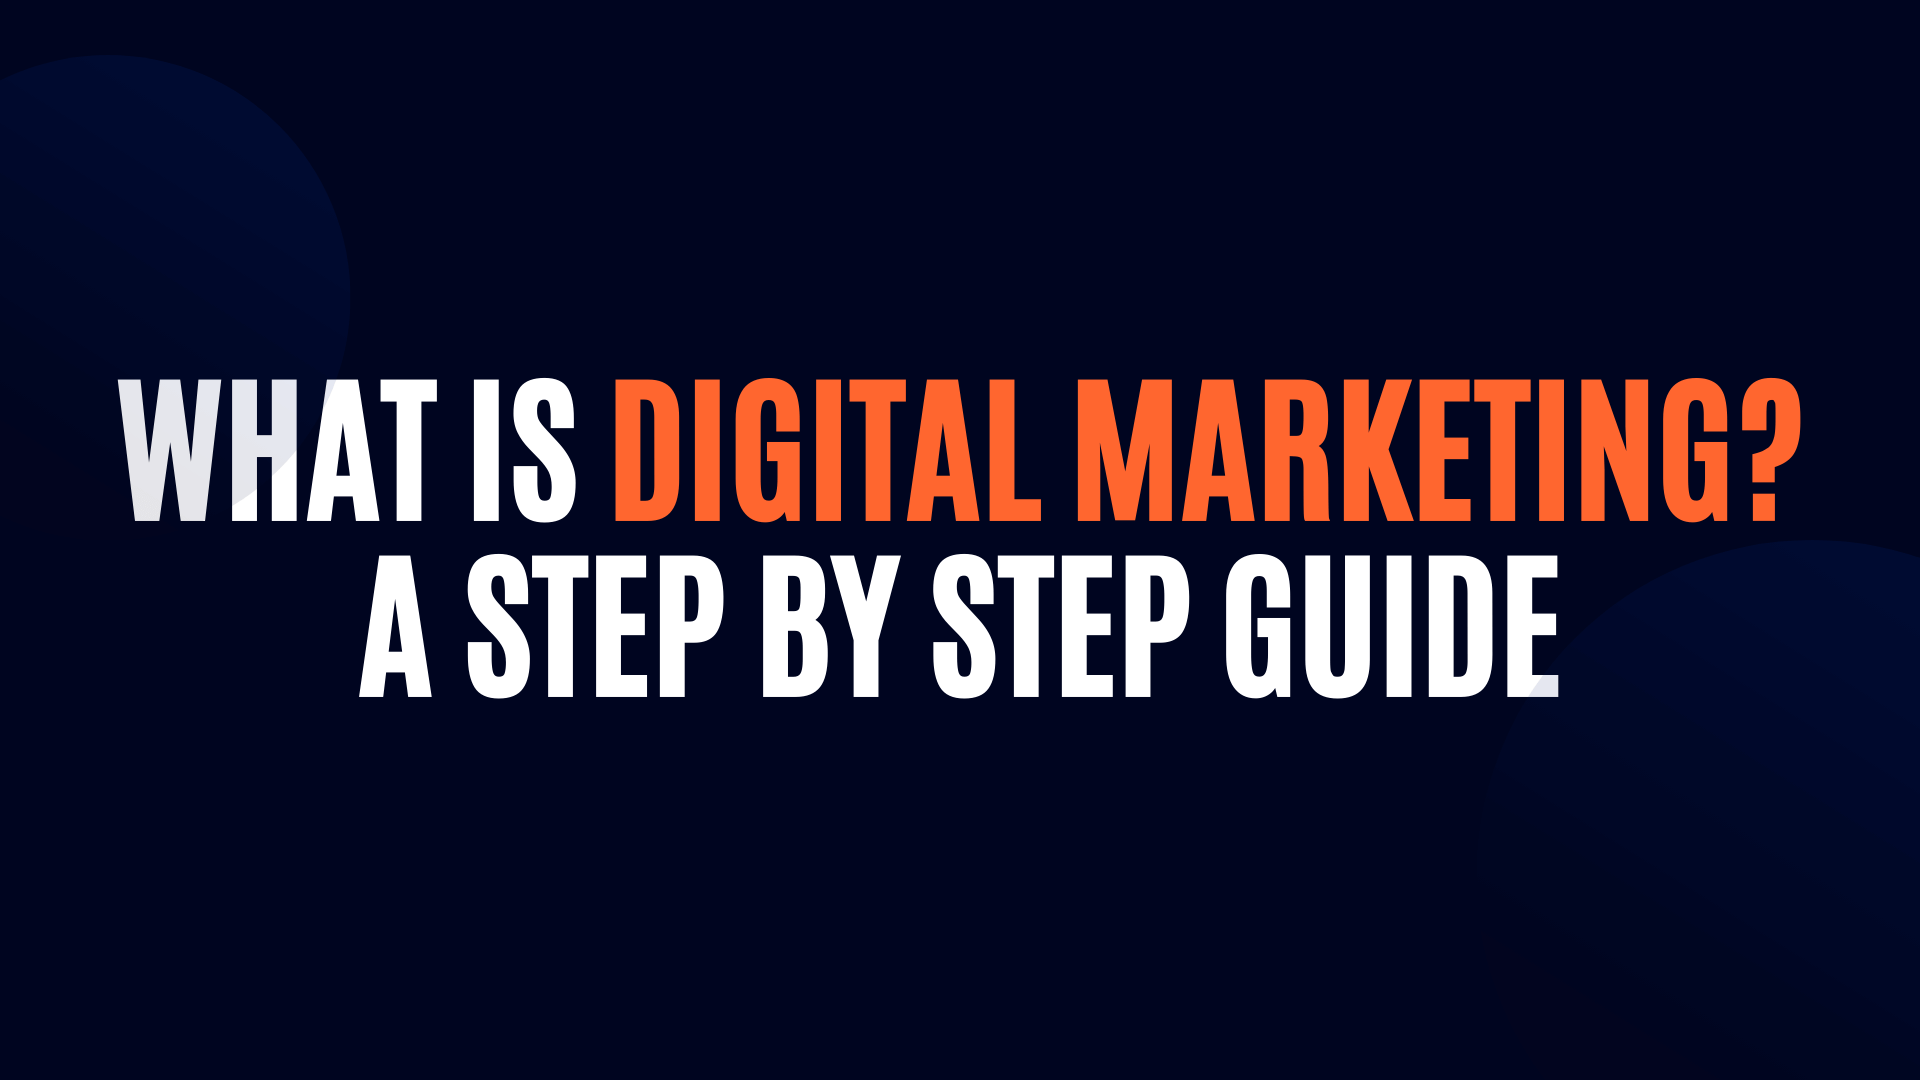 What is Digital Marketing? A Step by Step Guide